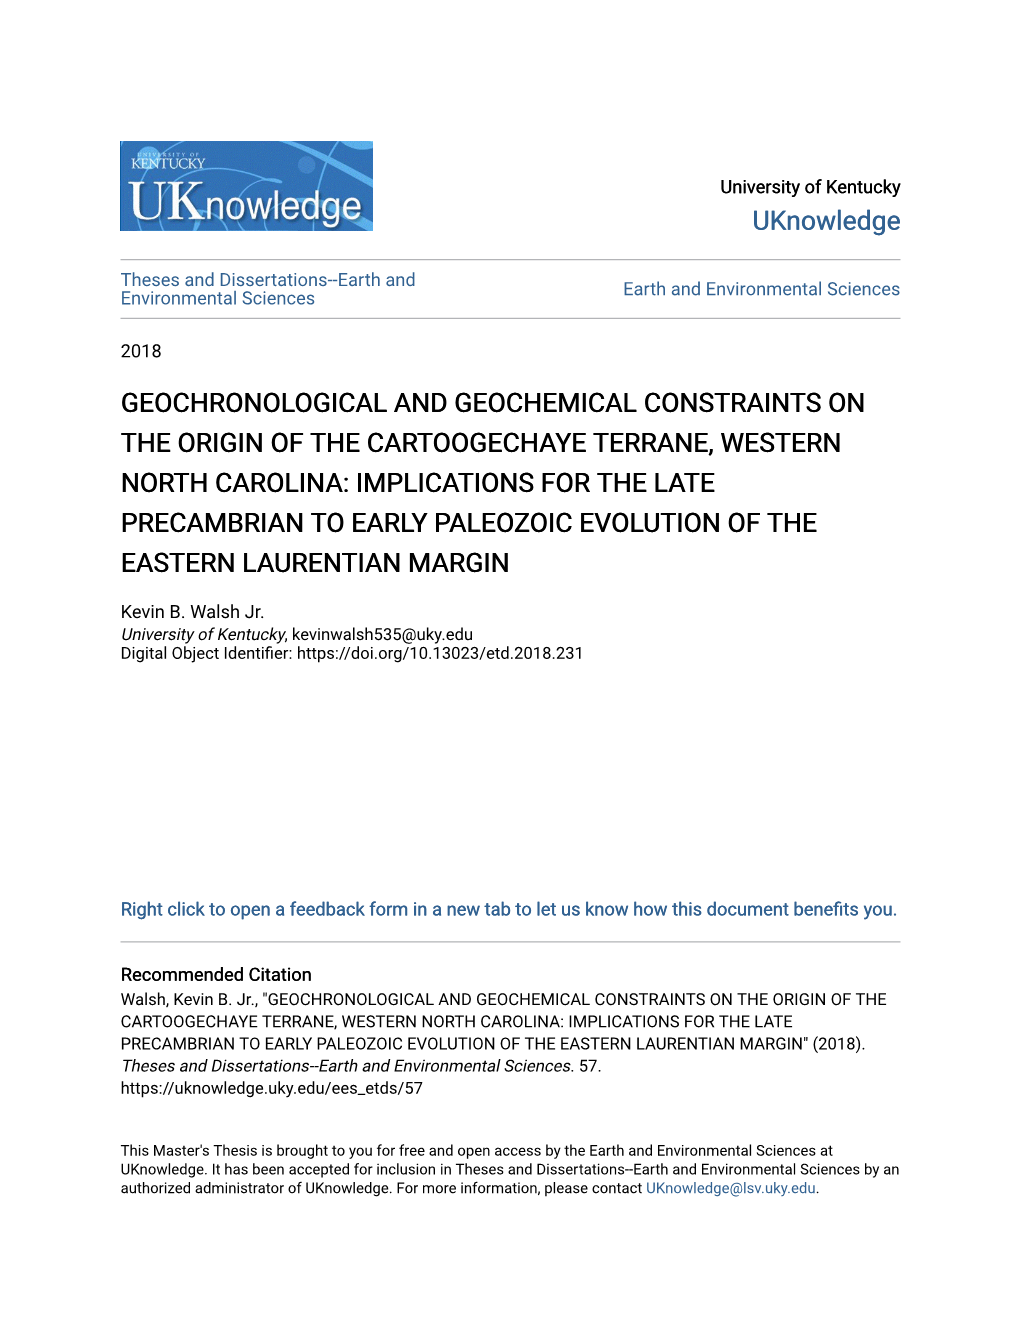 Geochronological and Geochemical Constraints on The